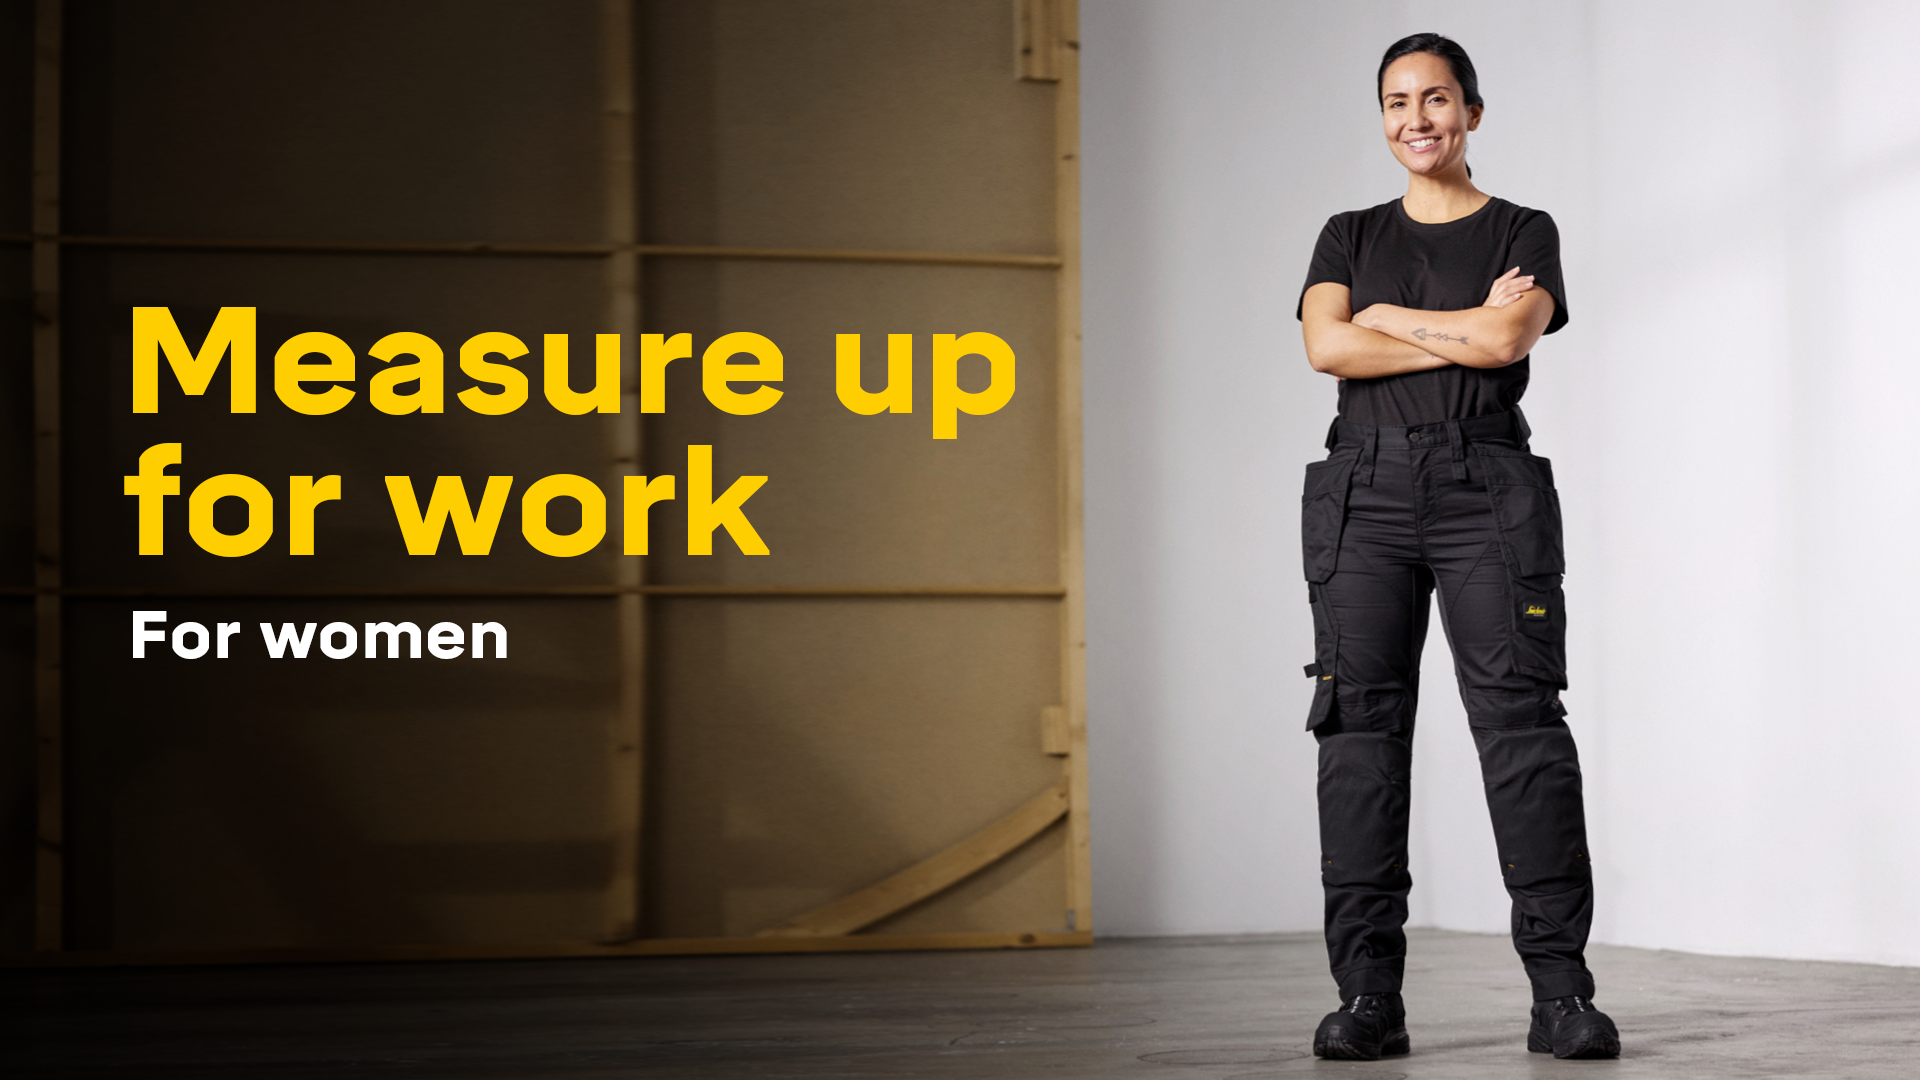 Work Wear fit to Perfection Sizes 10-30. Shop Now to Save Up to 25%!